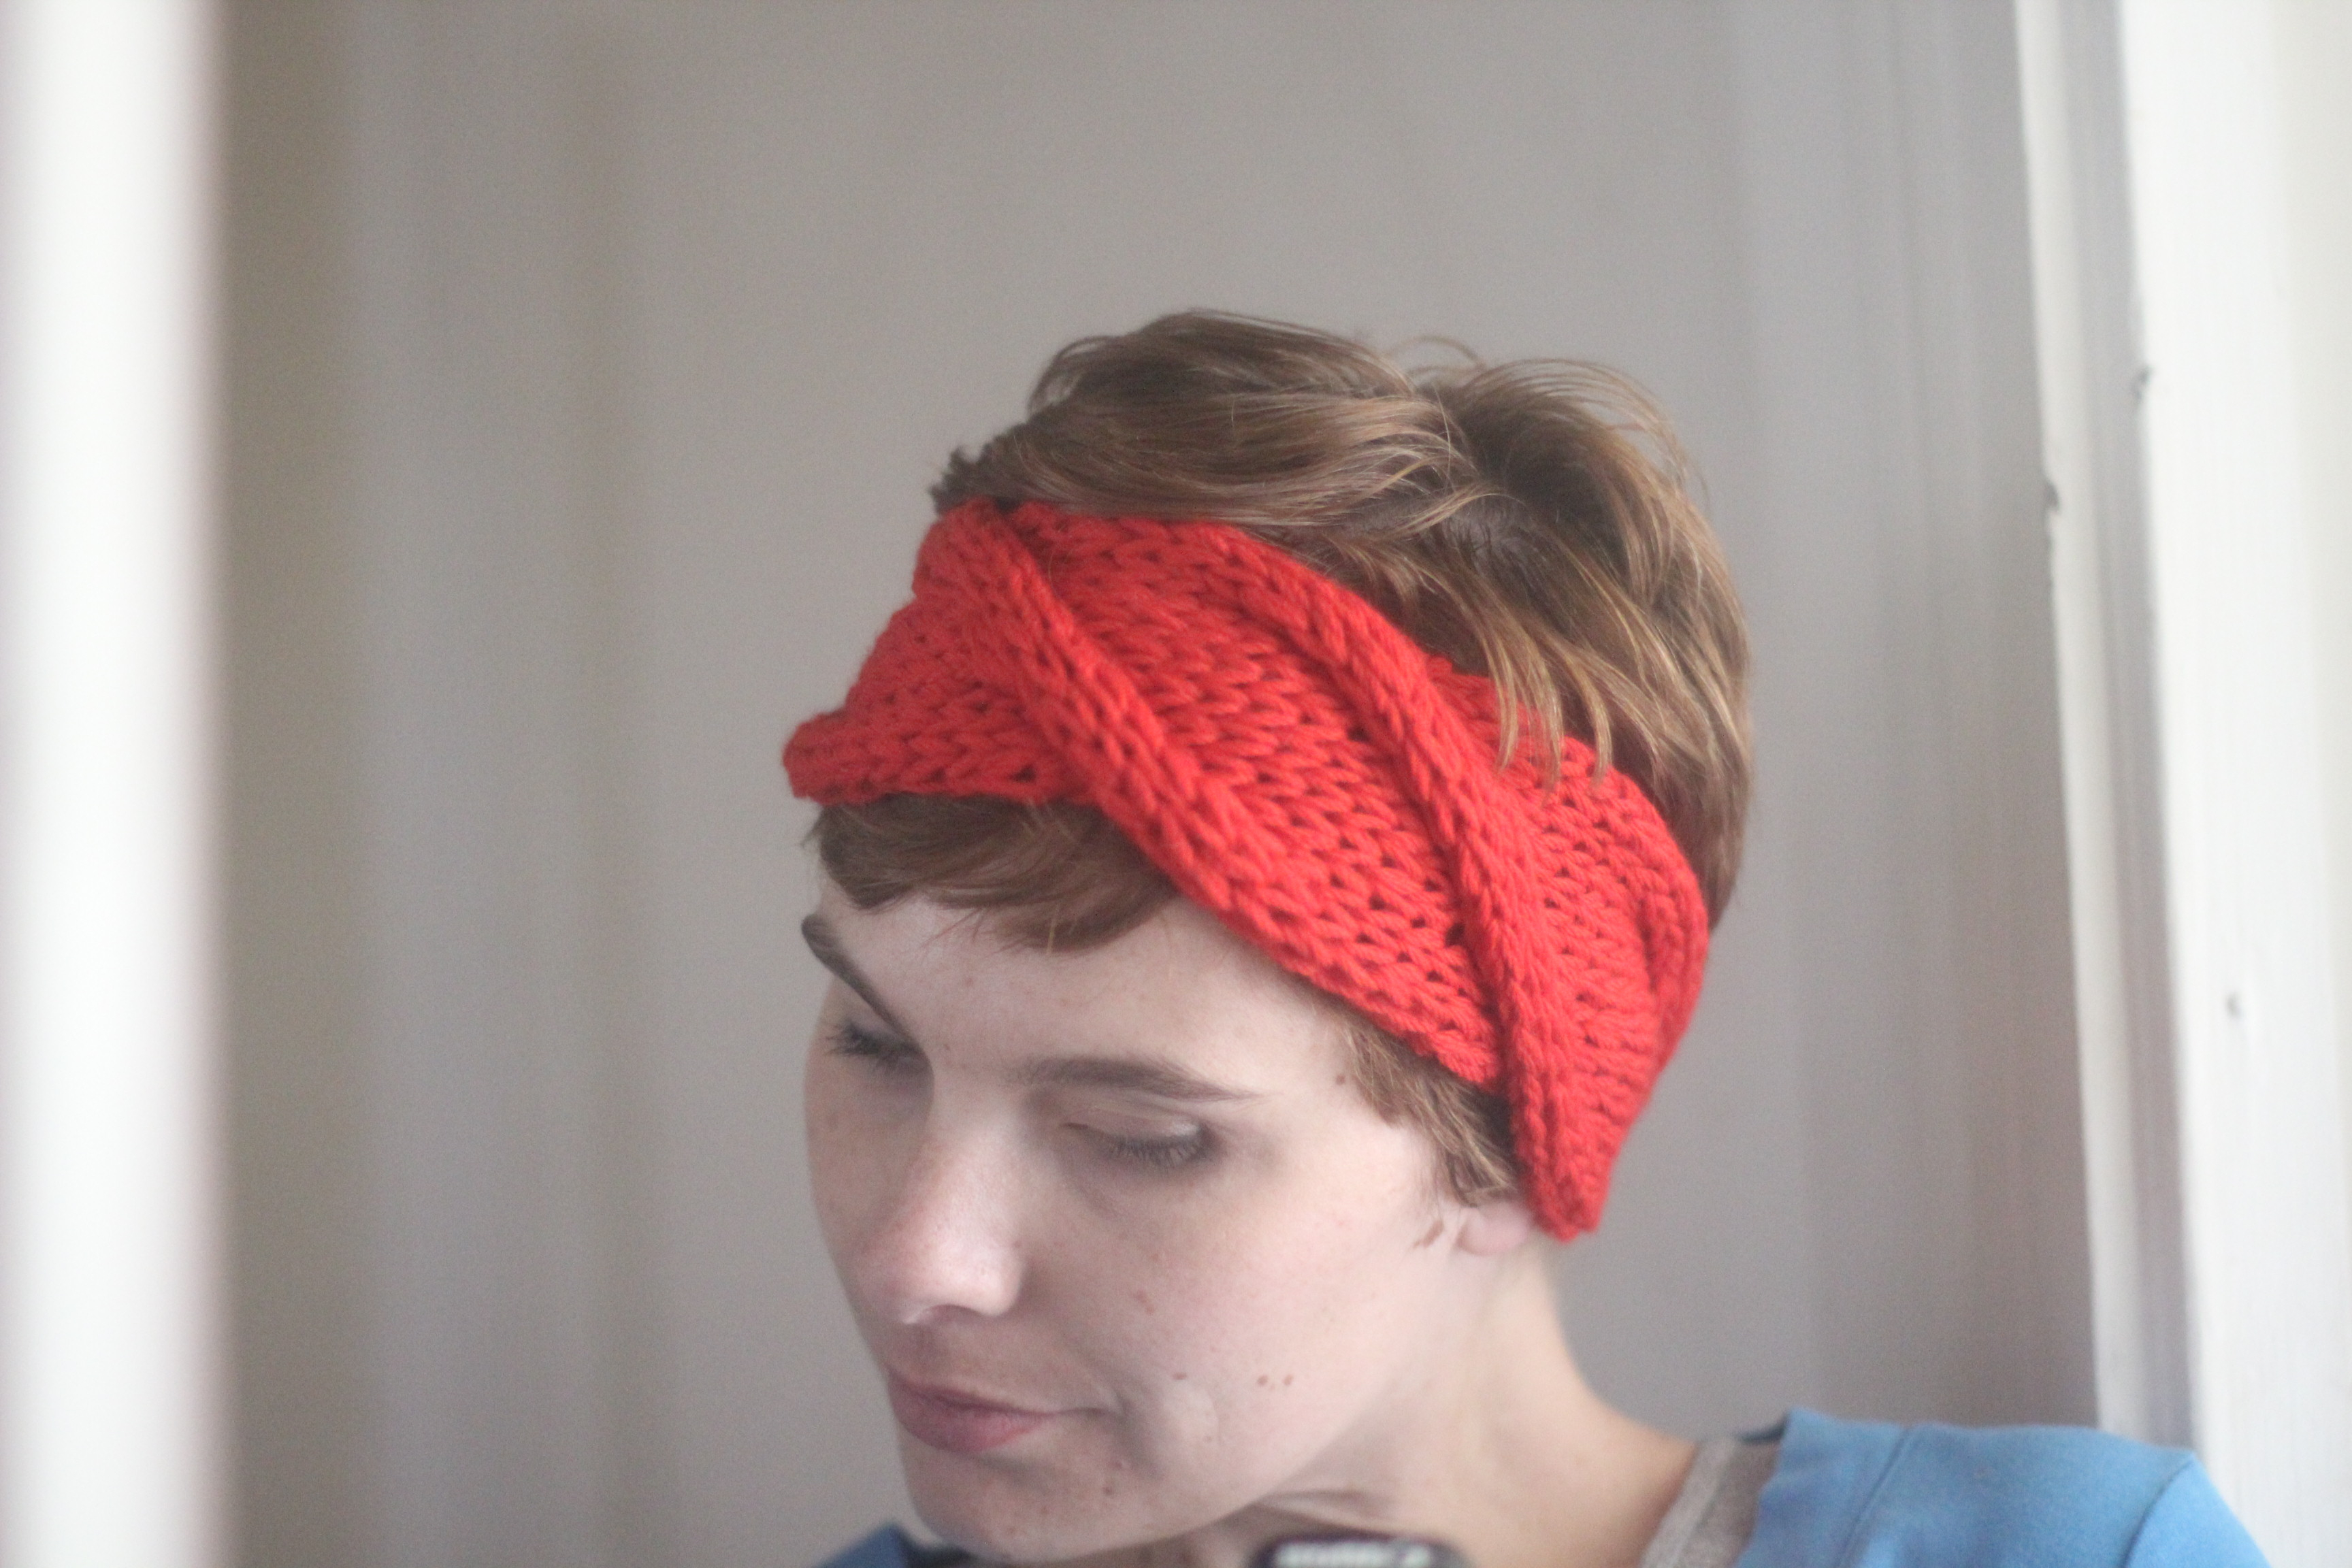 Free Knitting Patterns For Headbands Cable Headband Knitting Pattern Easy The Sweatshop Of Love Blog